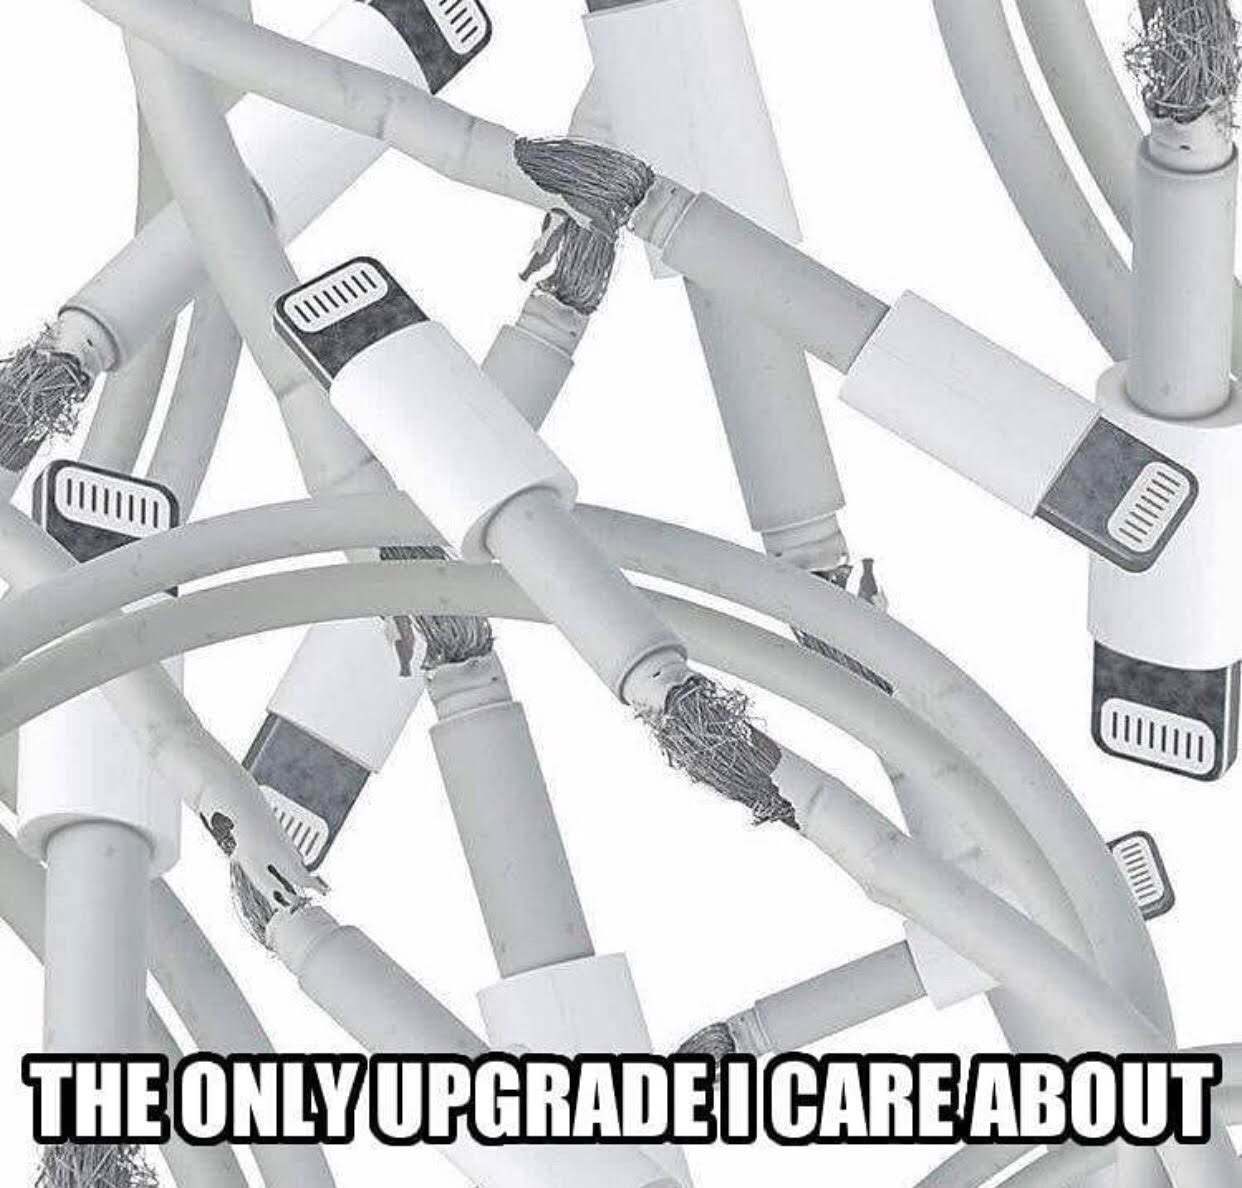 Internet meme - The Onlyupgradei Care About